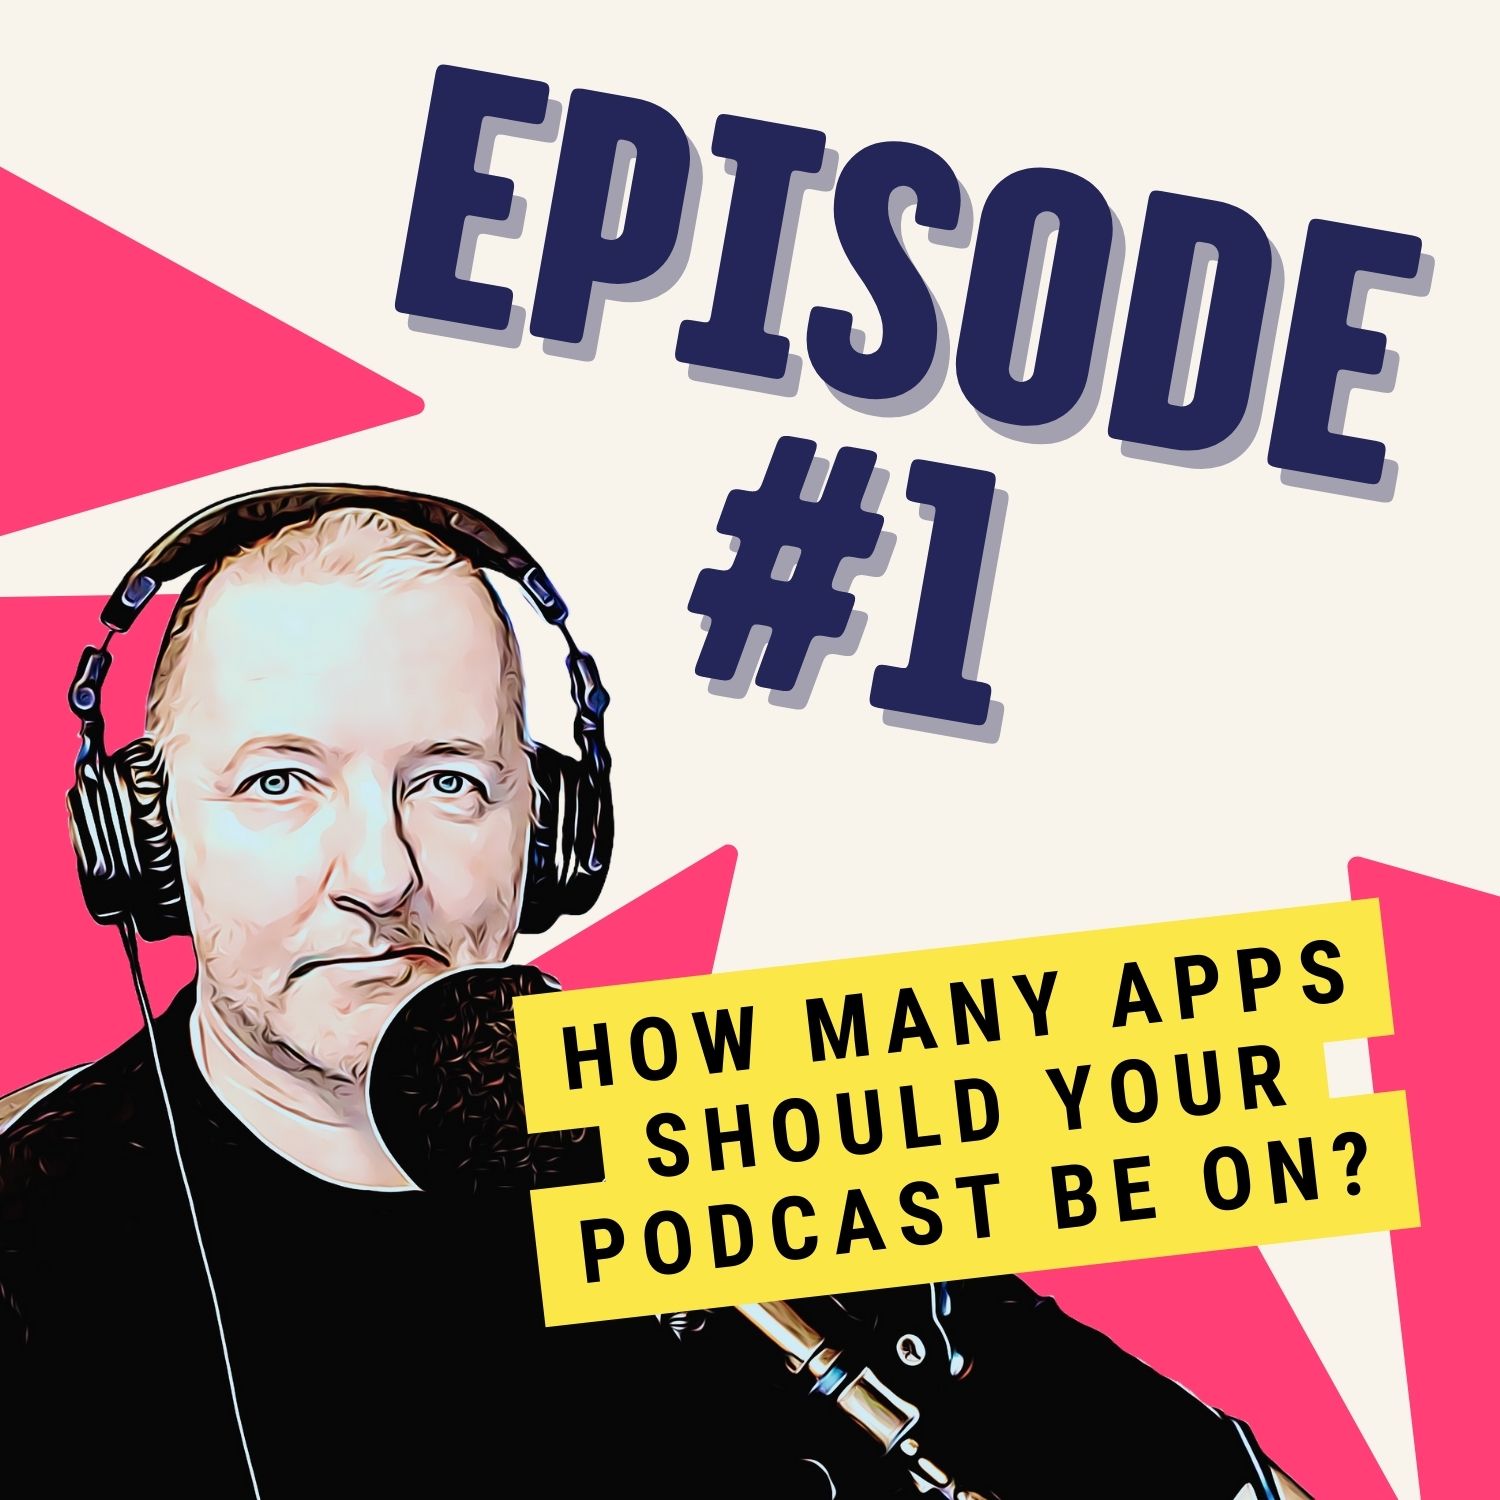 How Many Apps Should Your Podcast Be On?